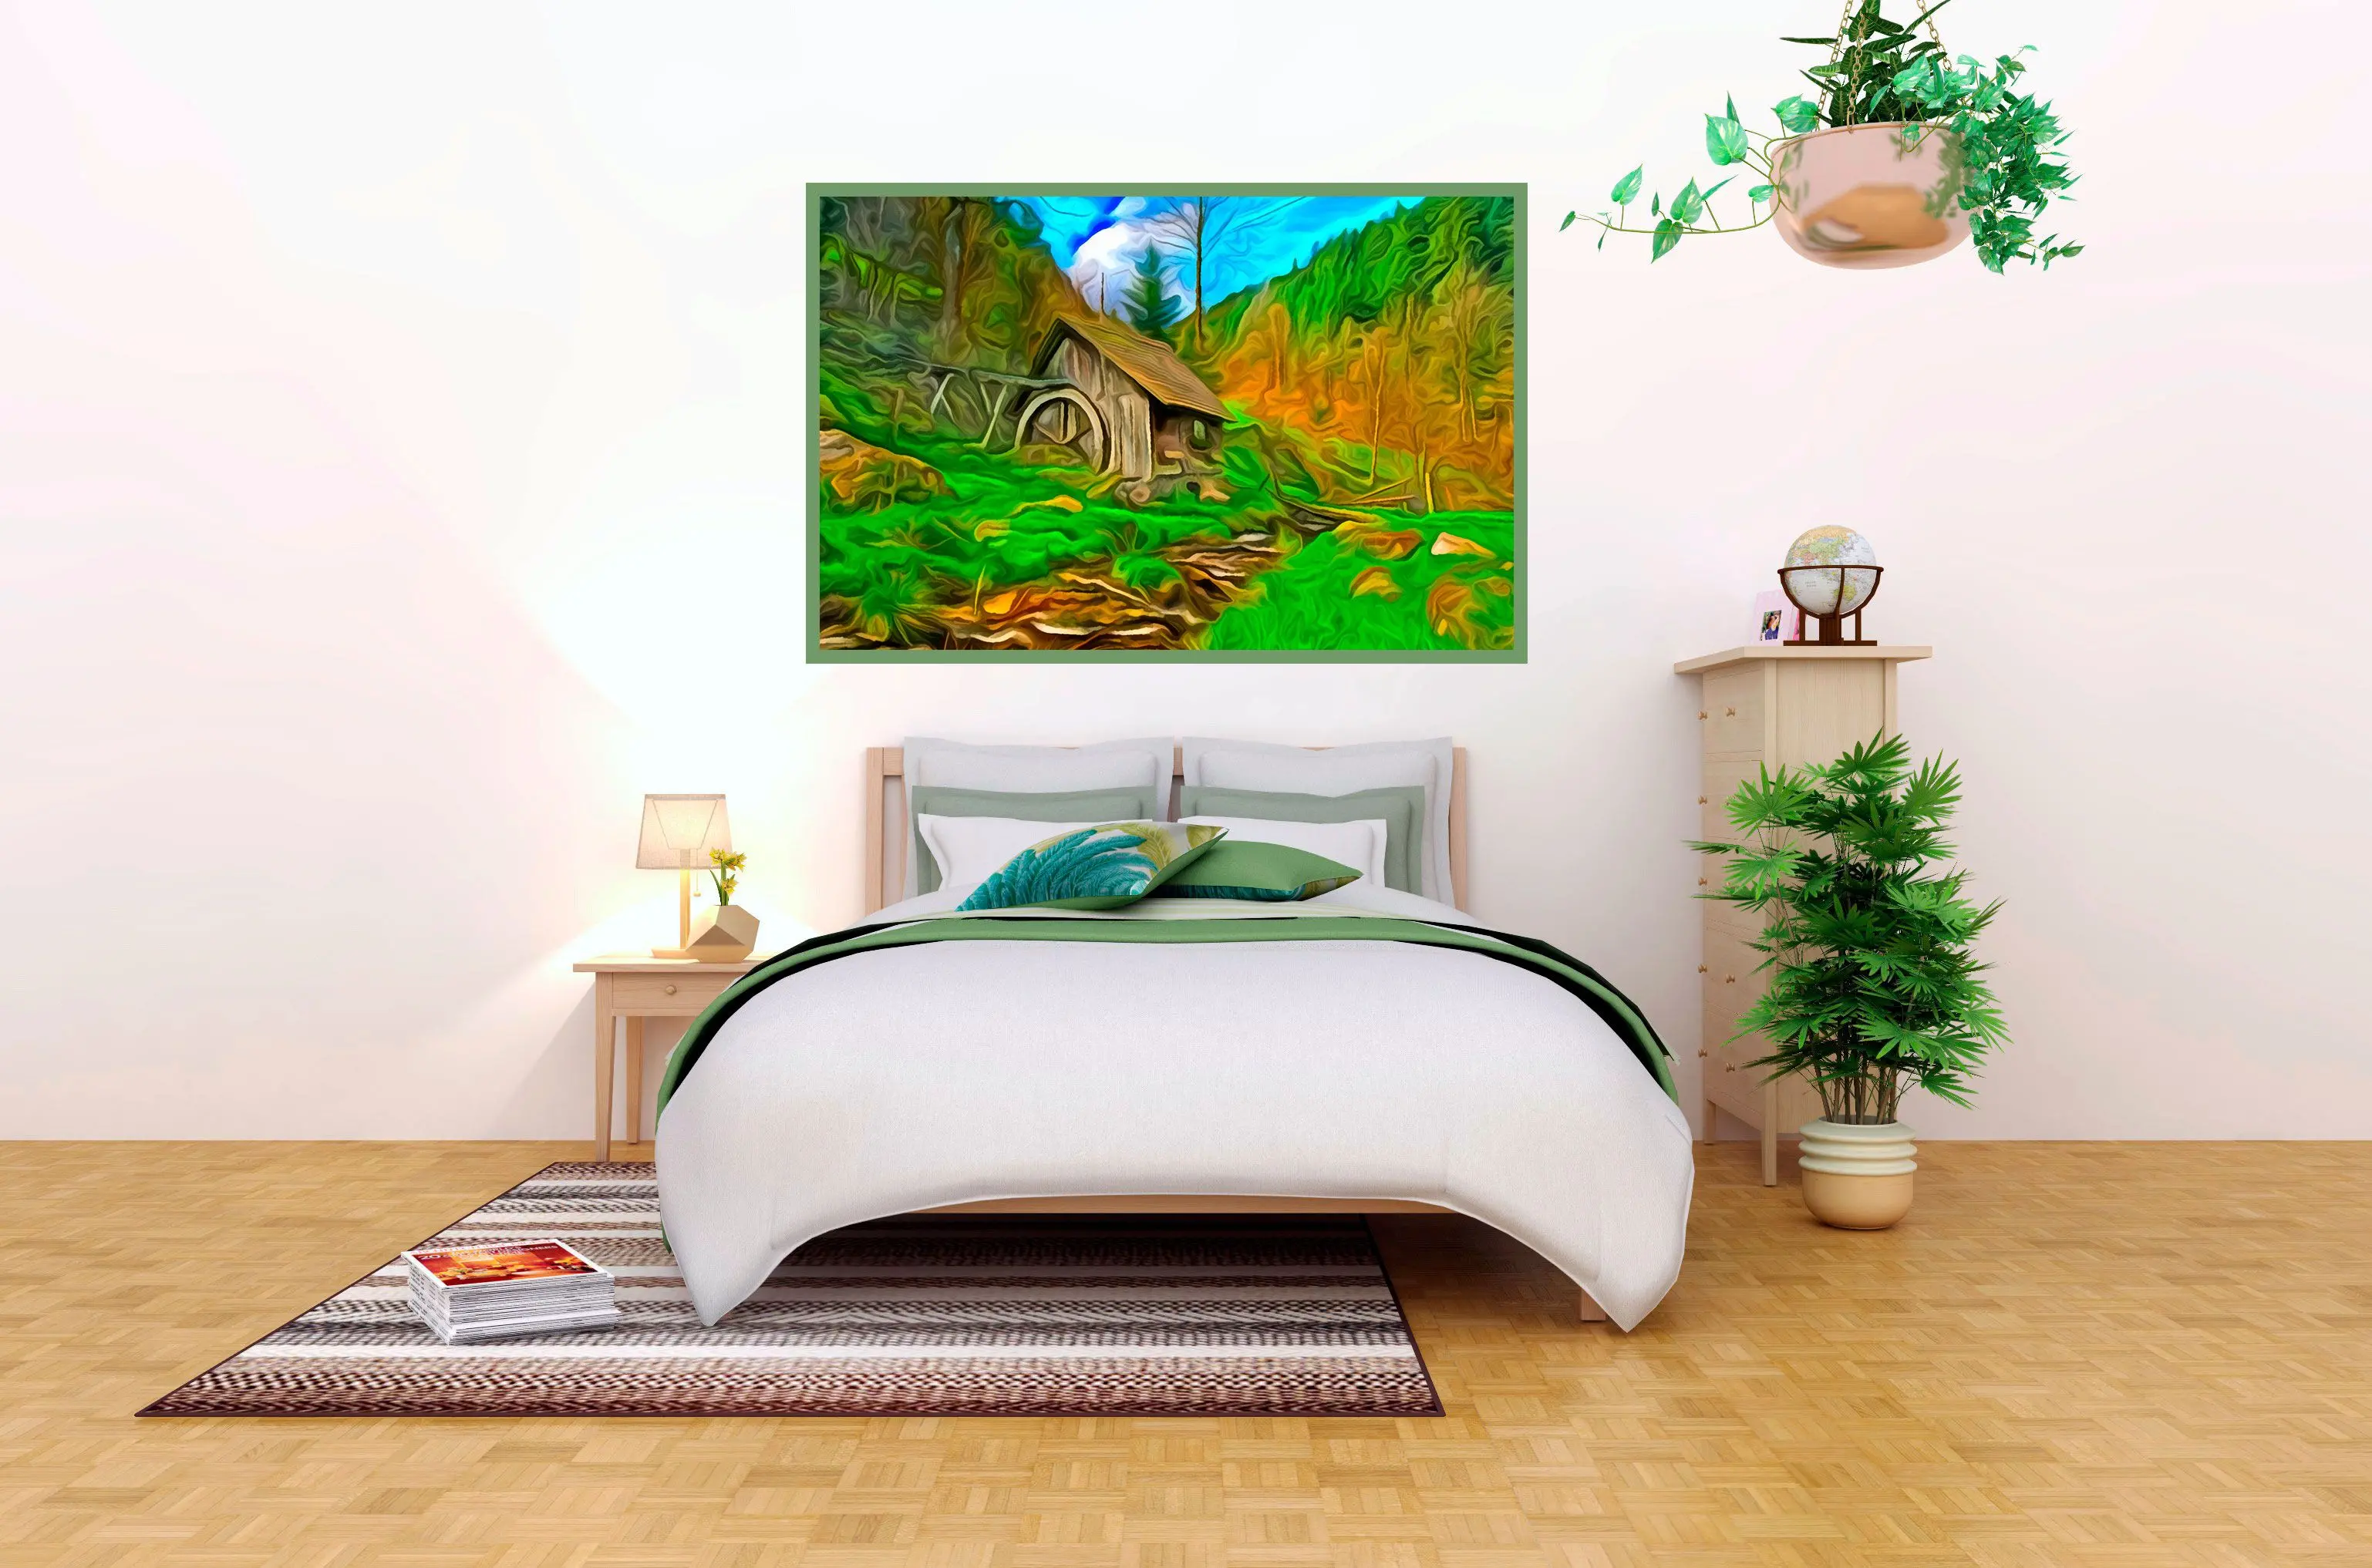 Create painting from photo for your home.